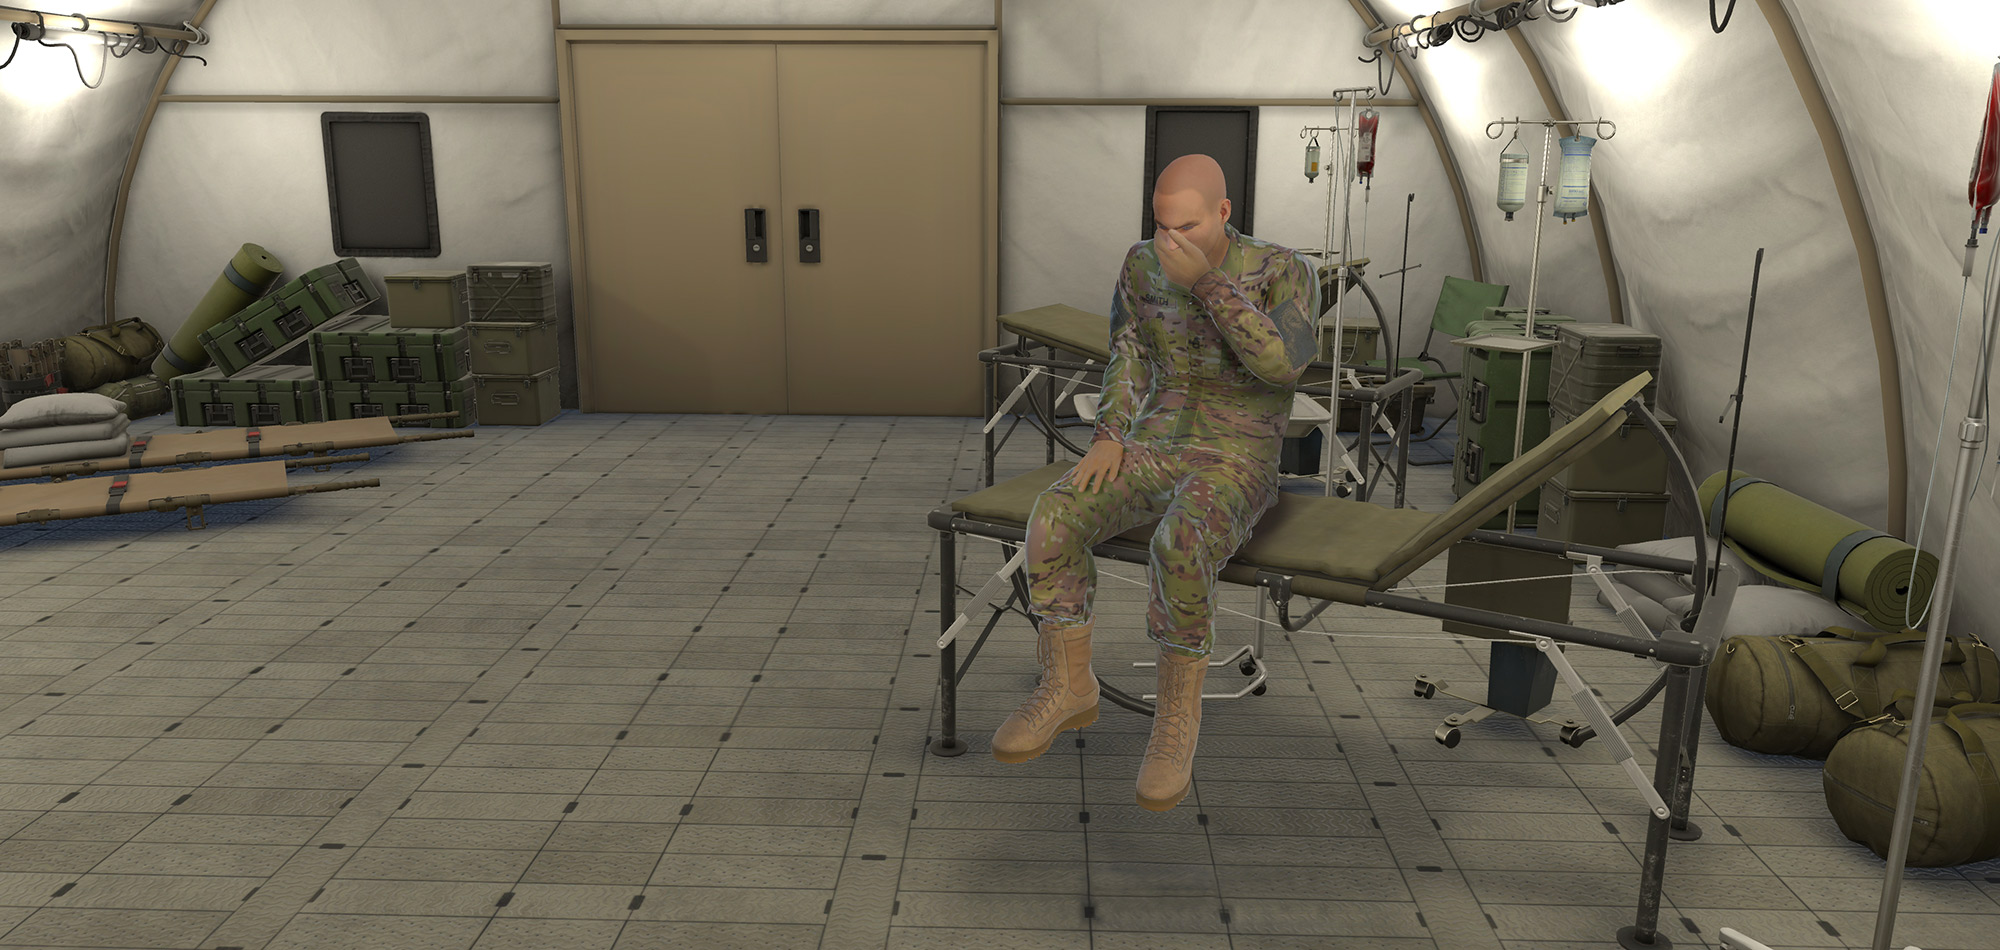 VRpatients’ Application to Military Training ‘Just Makes Sense’